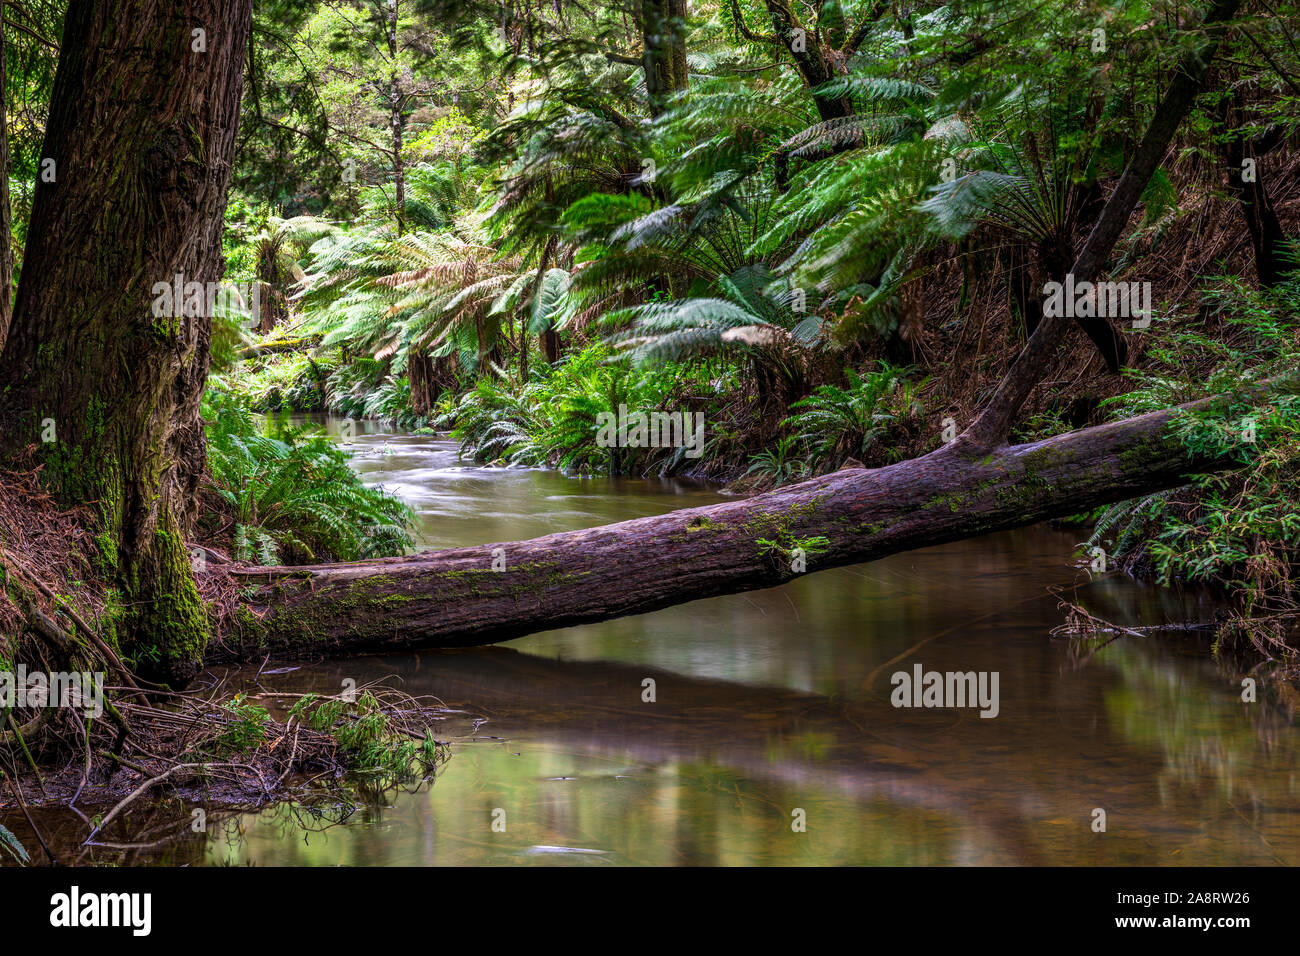 Large ferns and a stream in the Californian redwood forest in the Great Otway National Park in Victoria, Australia Stock Photo